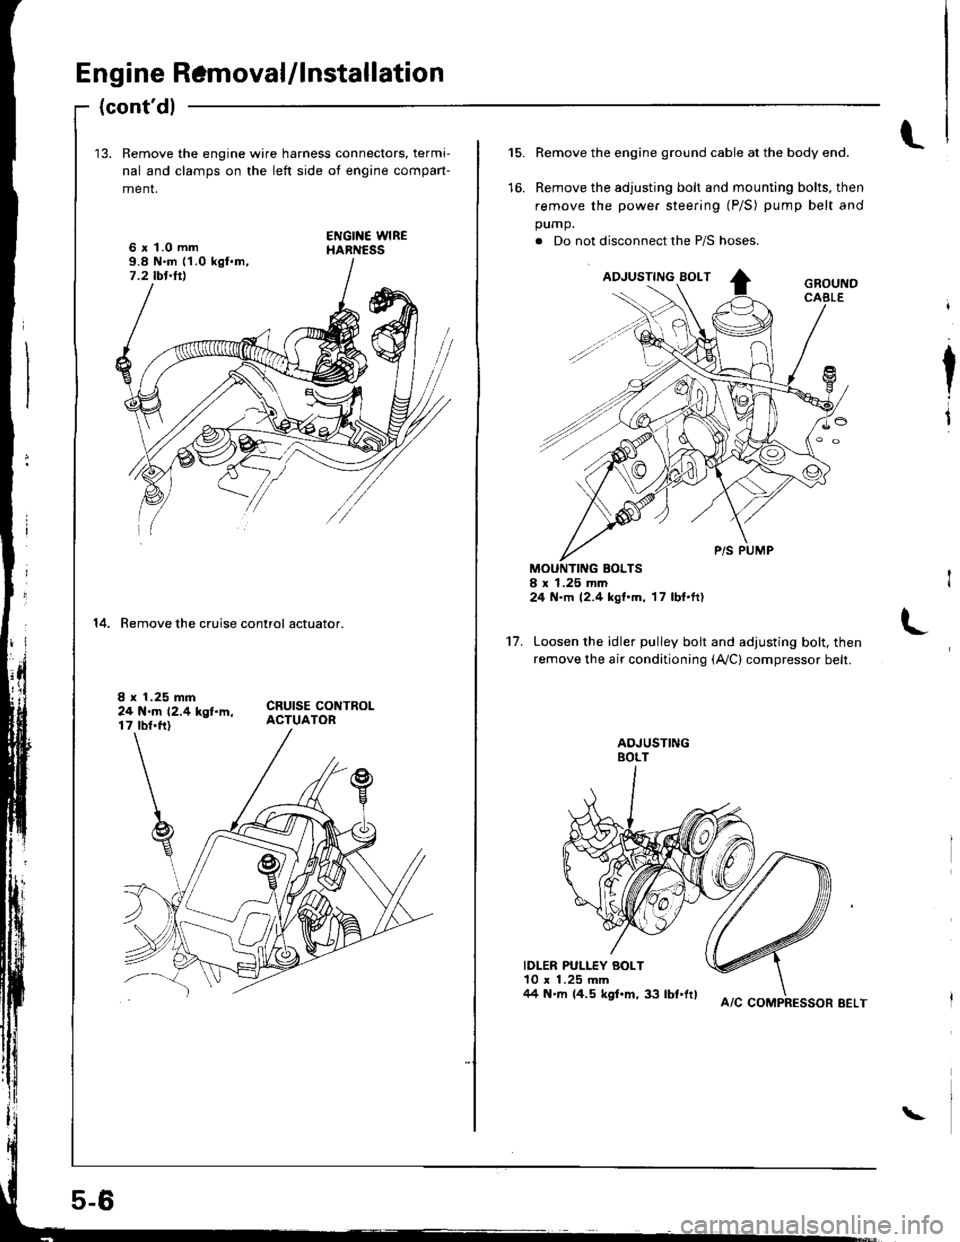 HONDA INTEGRA 1998 4.G Workshop Manual Engine Ramoval/lnstallation
(contdl
13. Remove the engine wire harness connectors, termi-
nal and clamps on the left side ot engine compan-
menr,
6 x 1.0 mm9.8 N.m 11.0 kgl.m,7.2 tbt.ttl
14. Remove t